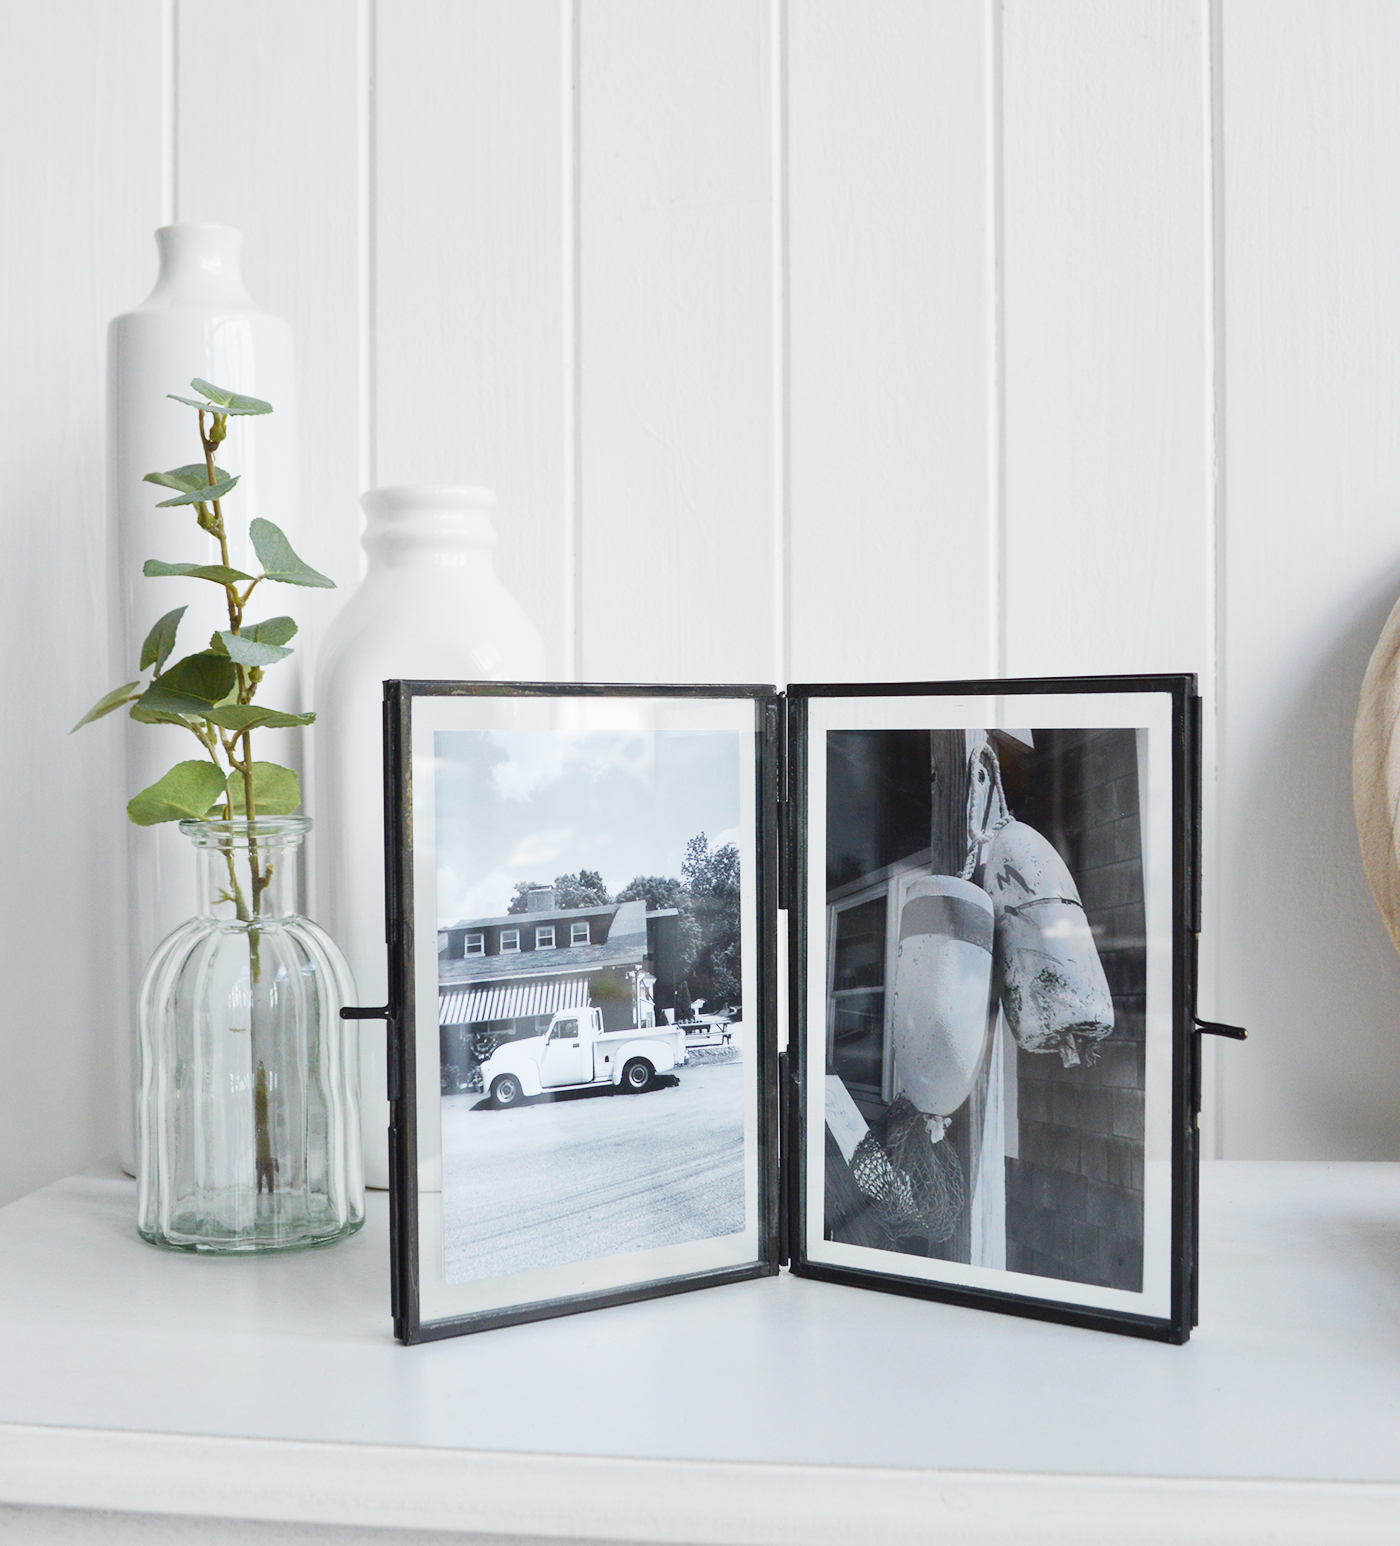 Putney glass photo frame for 5 x 7 photographs - portrait or landscape. White Furniture and home decor accessories for the New England styled home for all country, coastal and city houses.